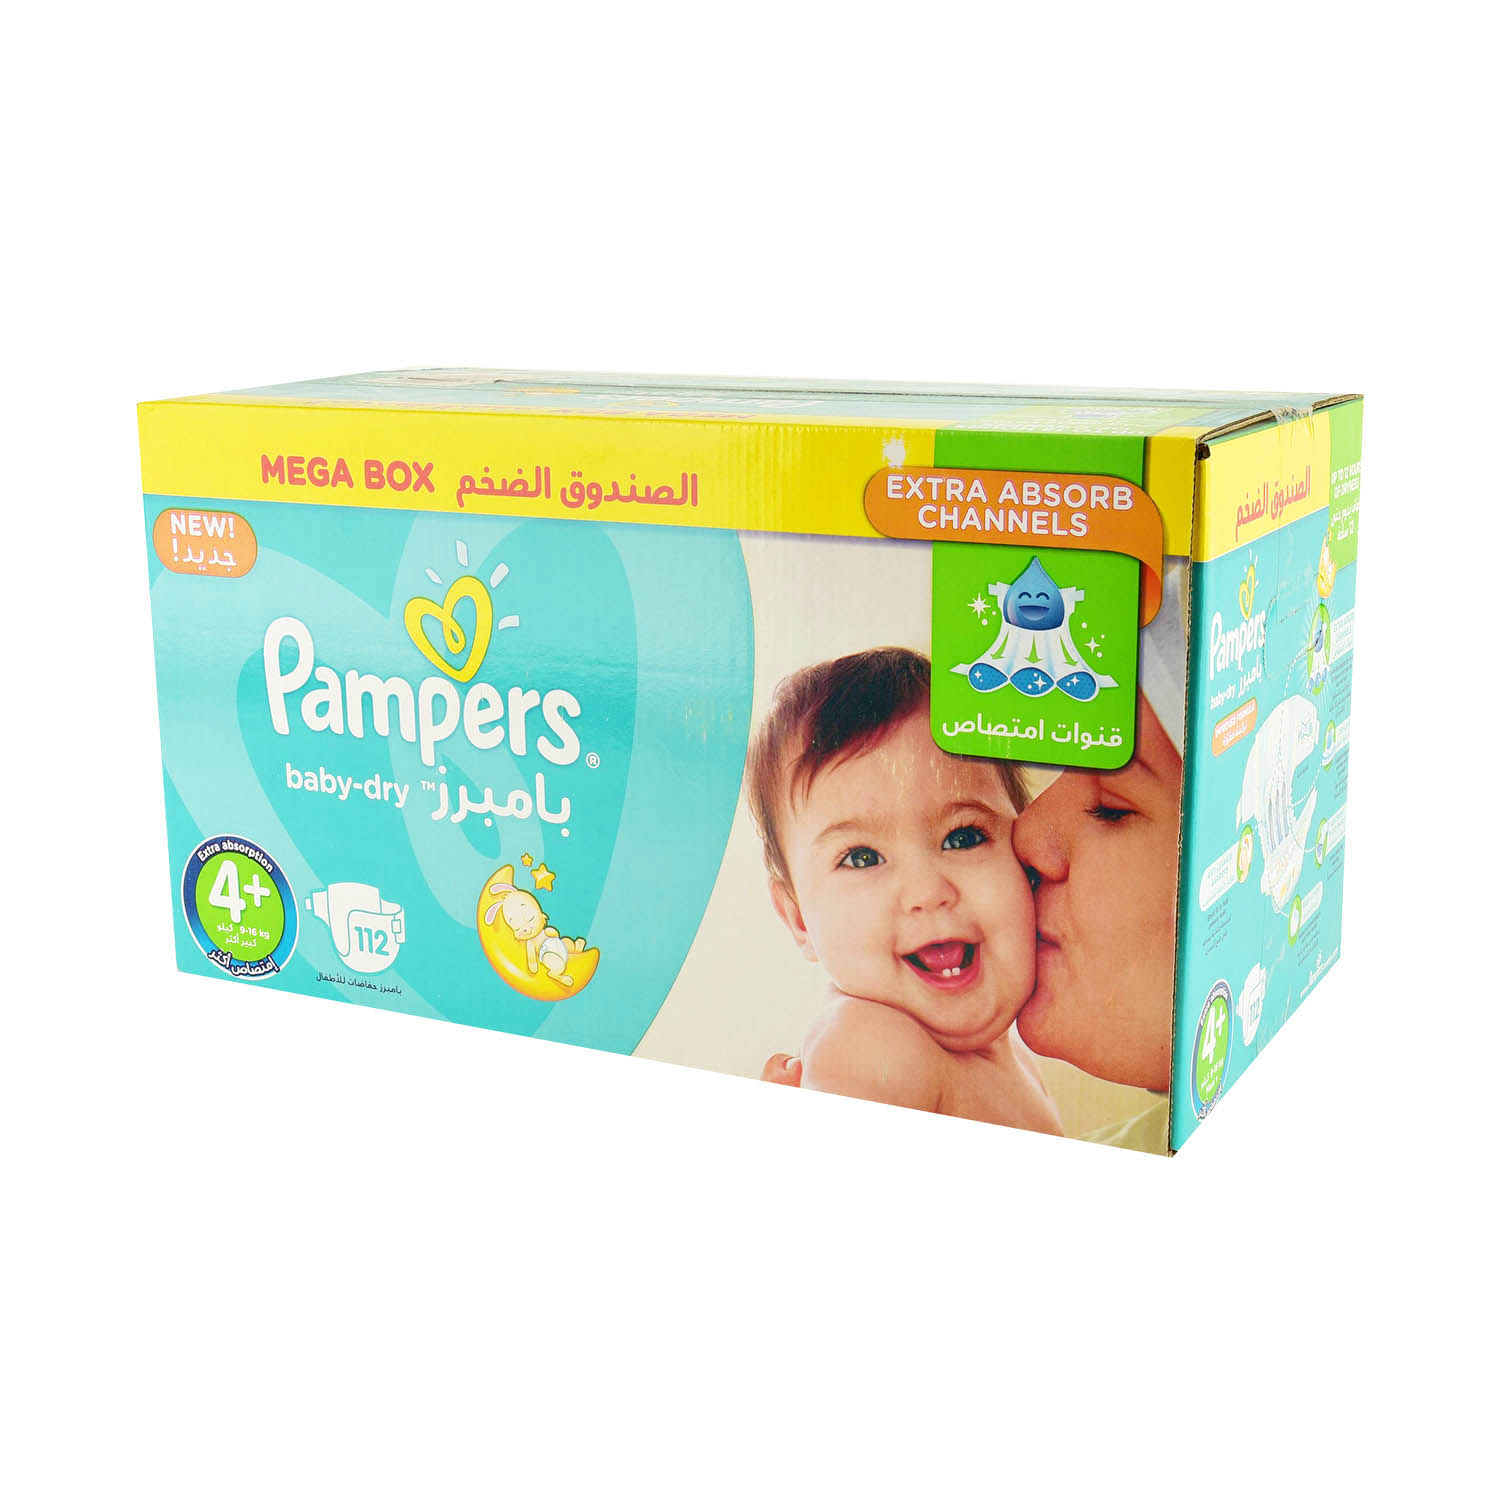 pampers change